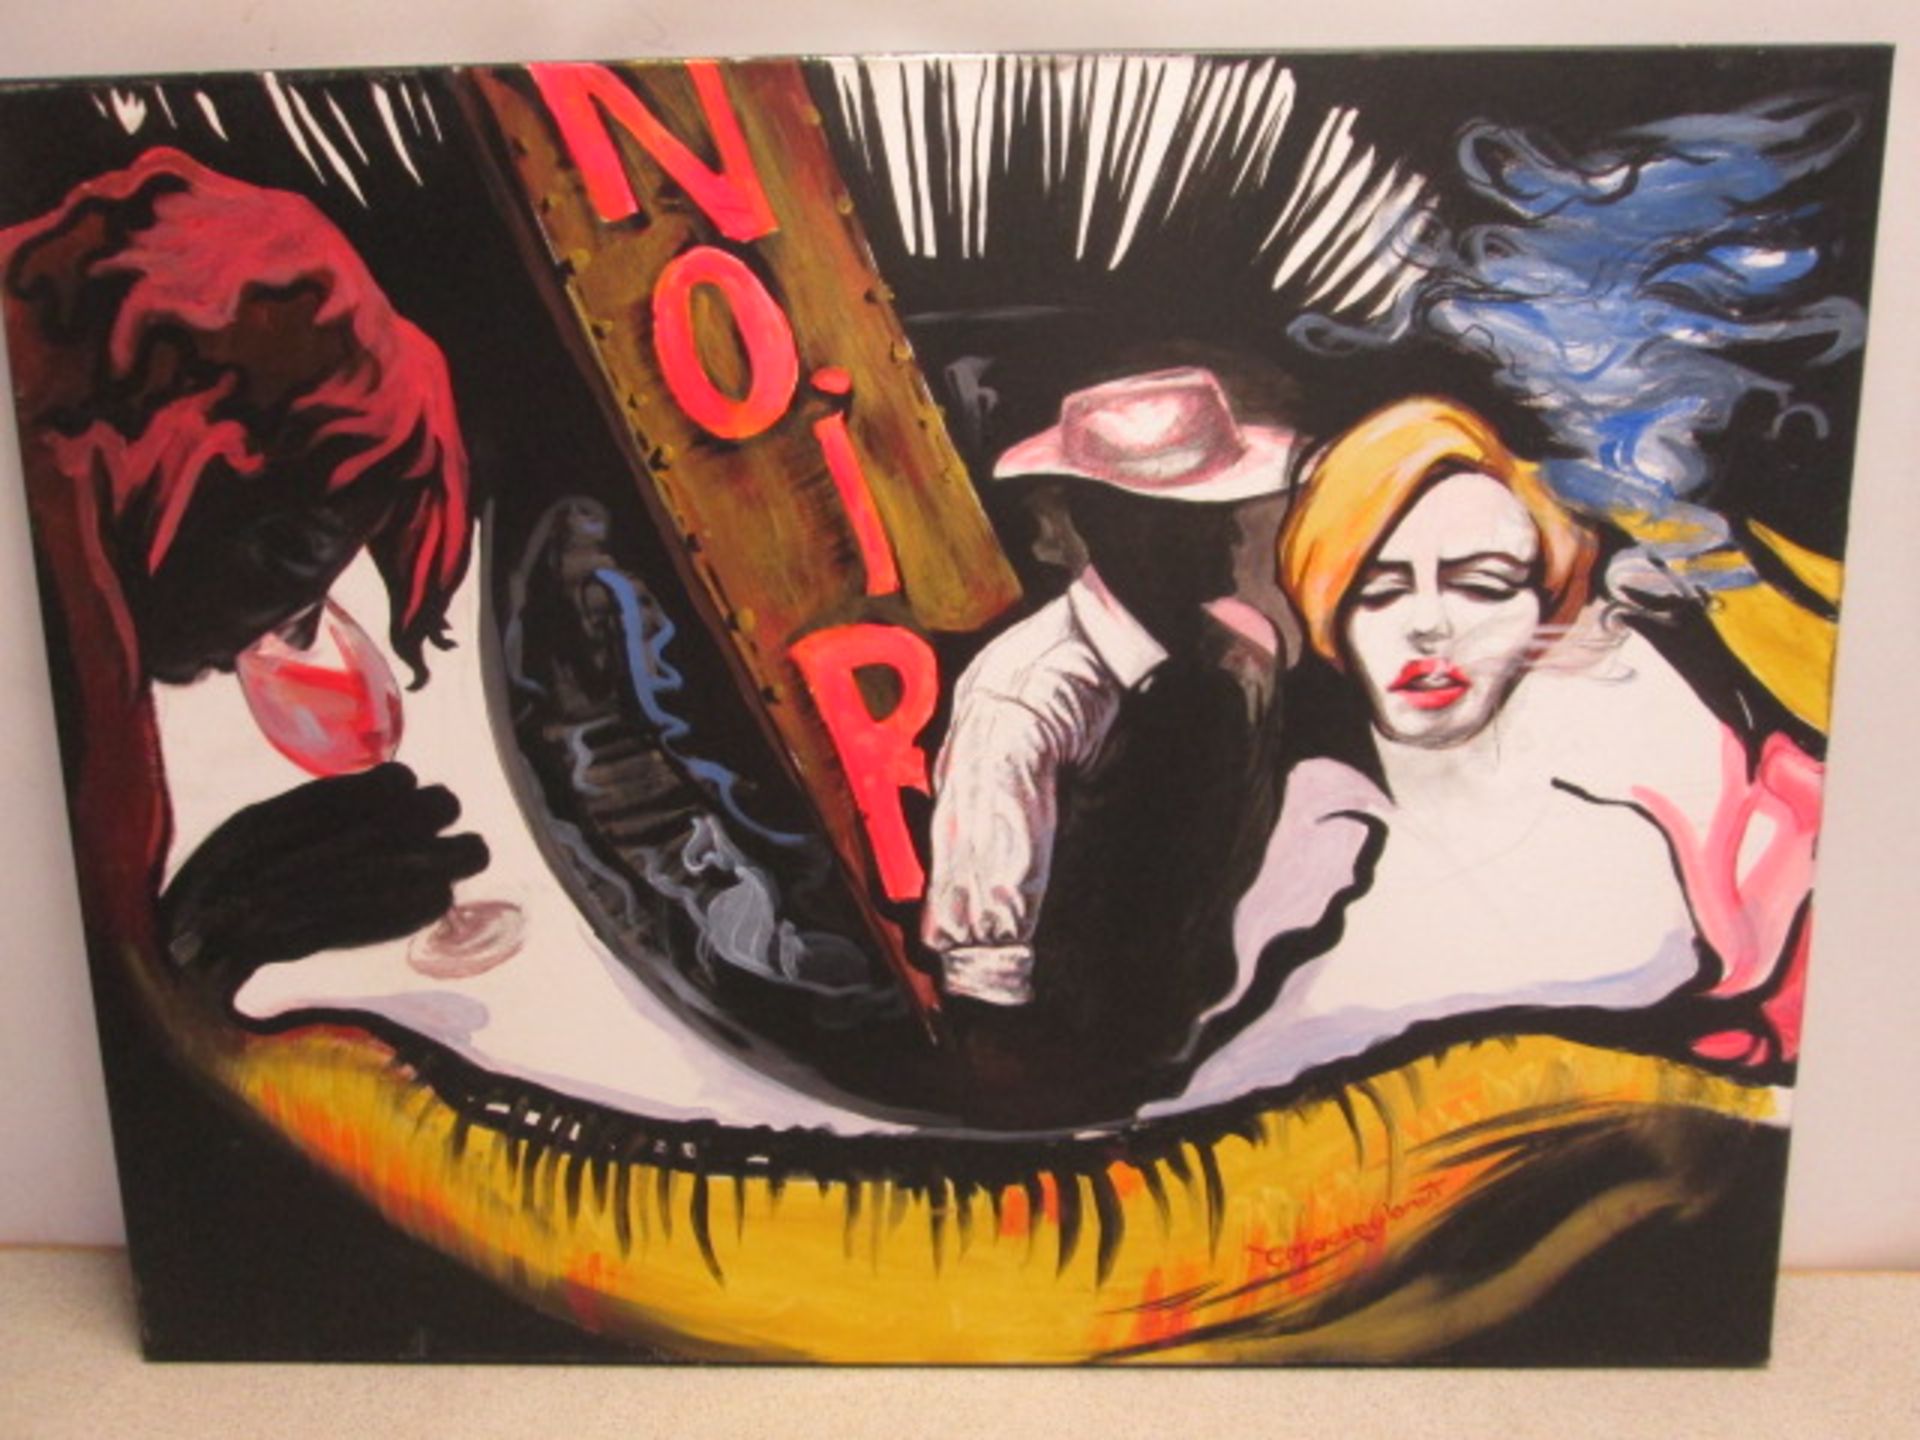 Artwork Depicting Noir Late Night Man & Drinking/Smoking Lady. Signed by the Artist (As Pictured).